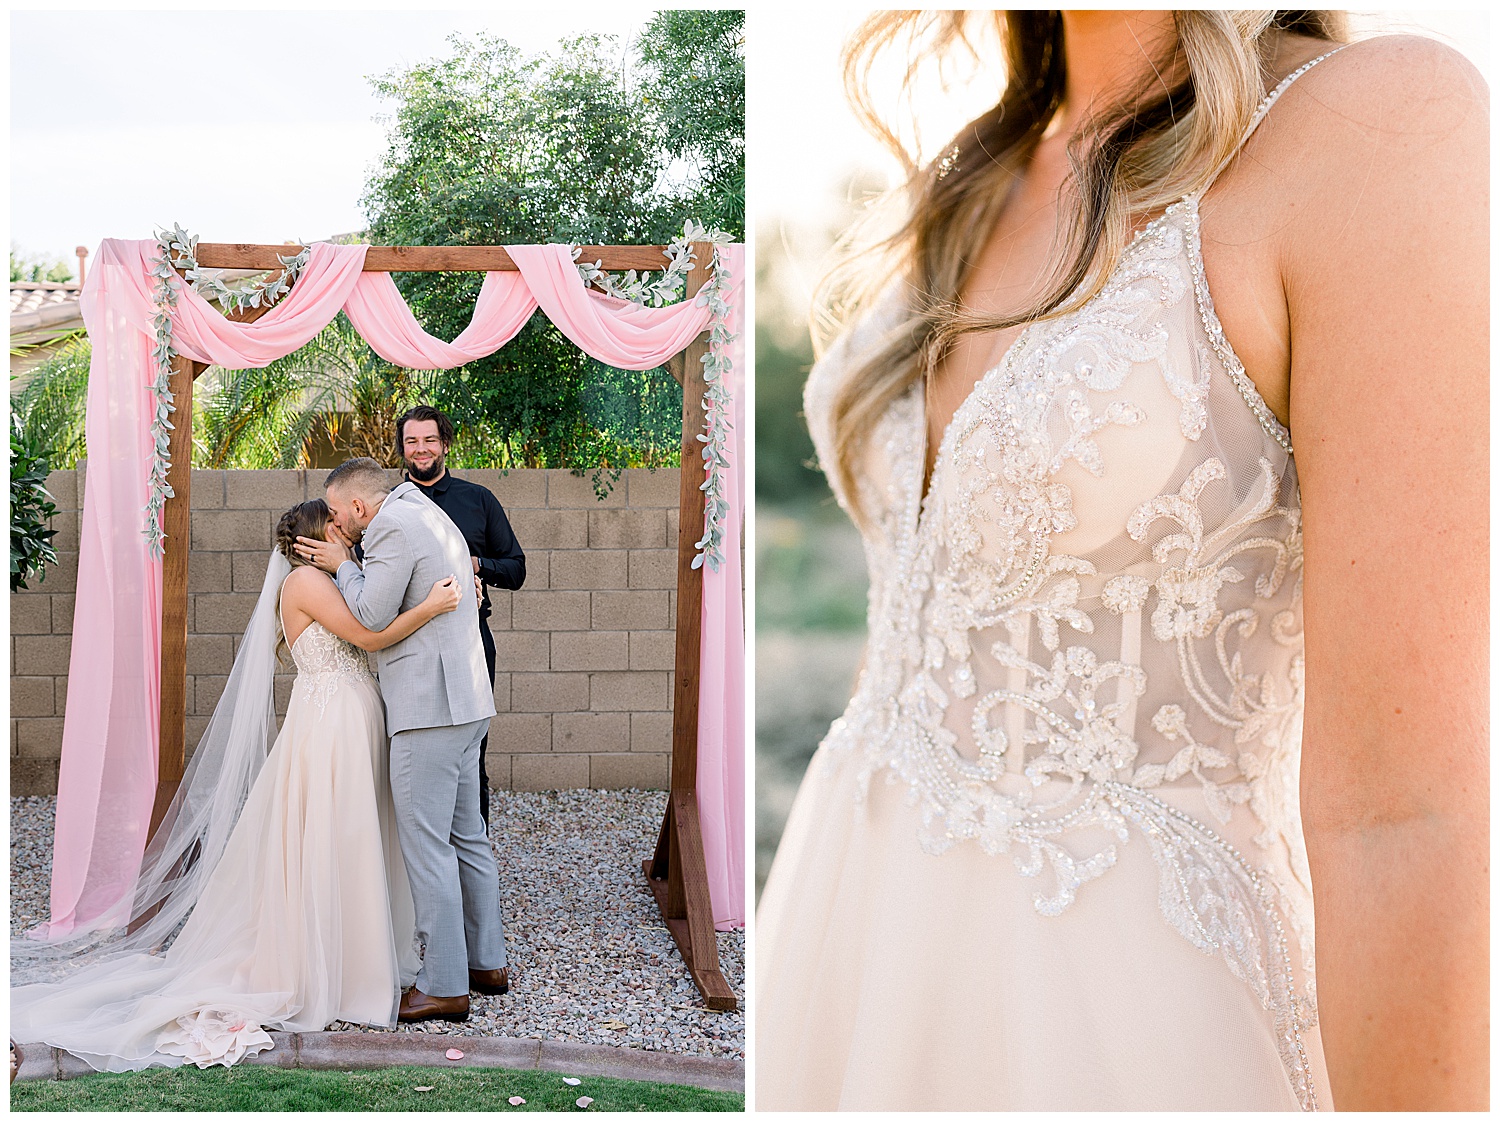 first kiss and bridal gown of desert estate wedding